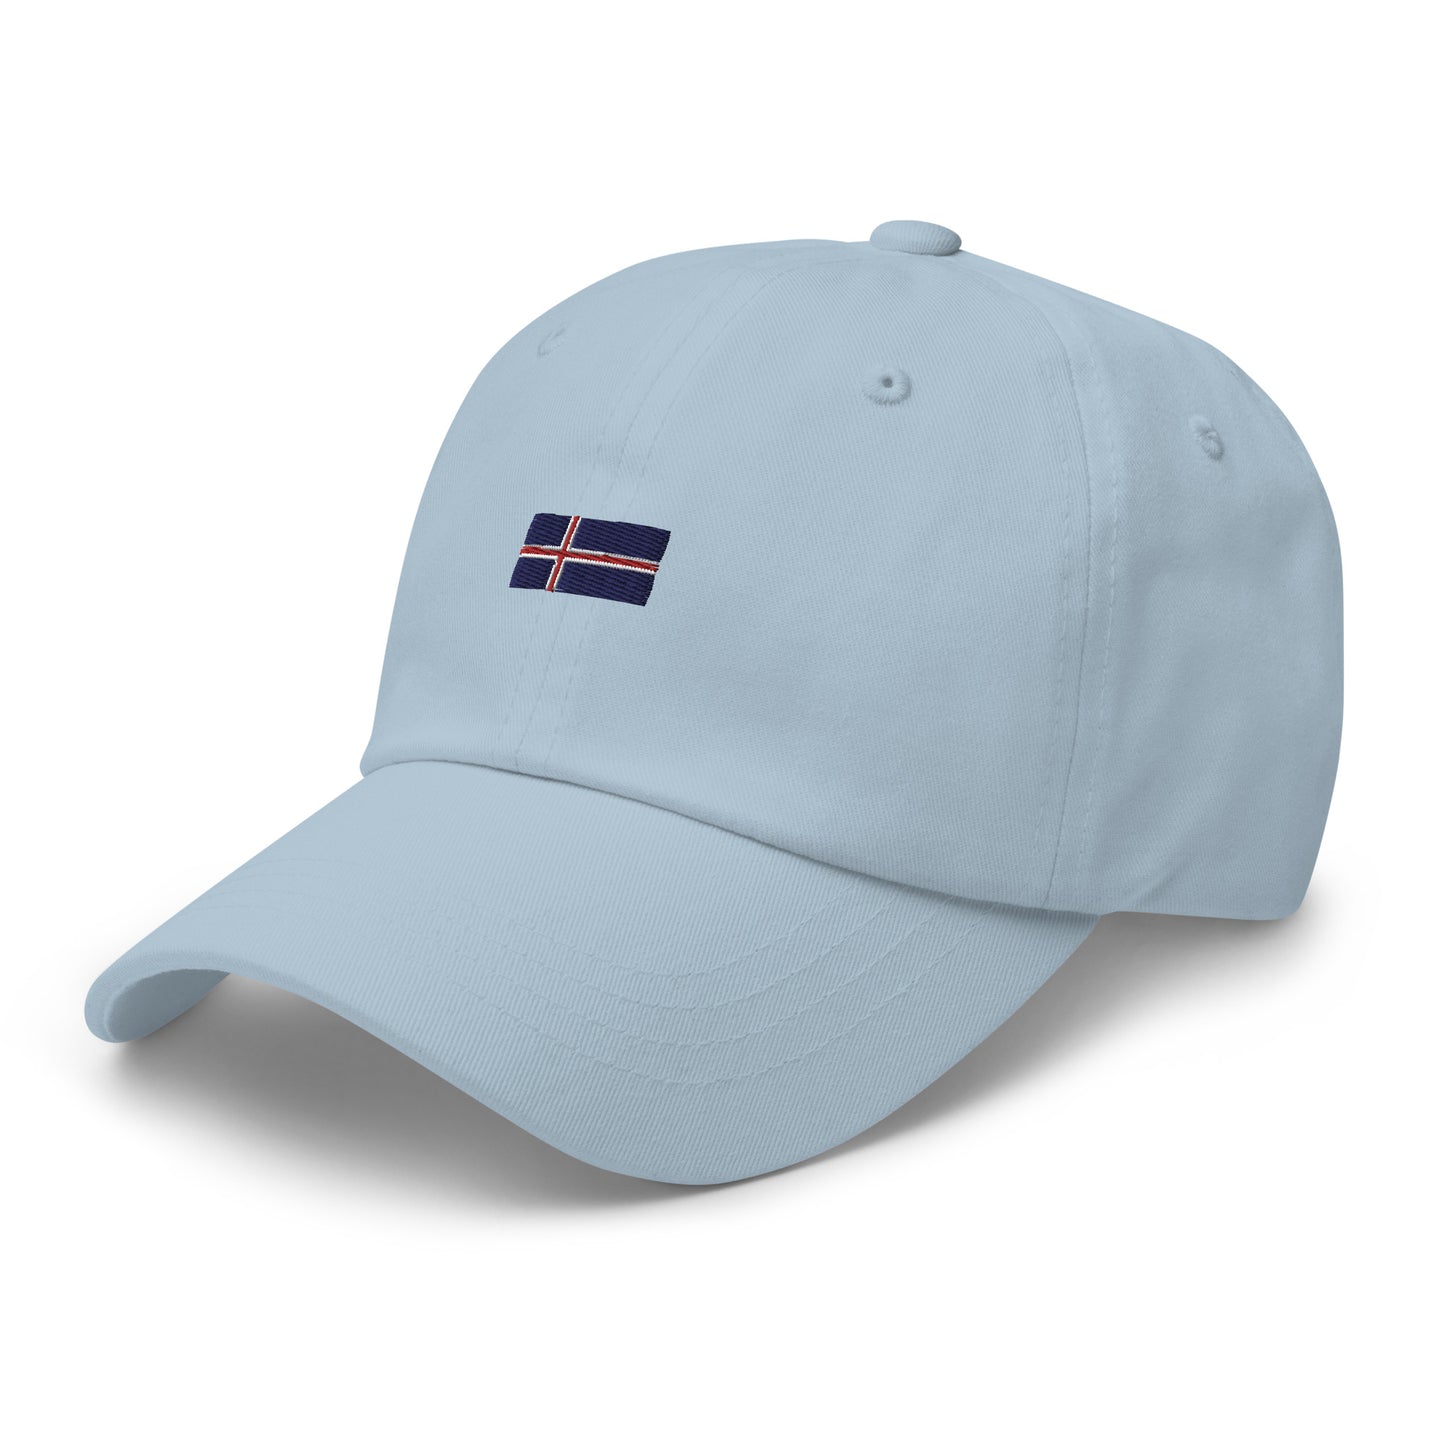 cap-from-the-front-with-icelandic-flag